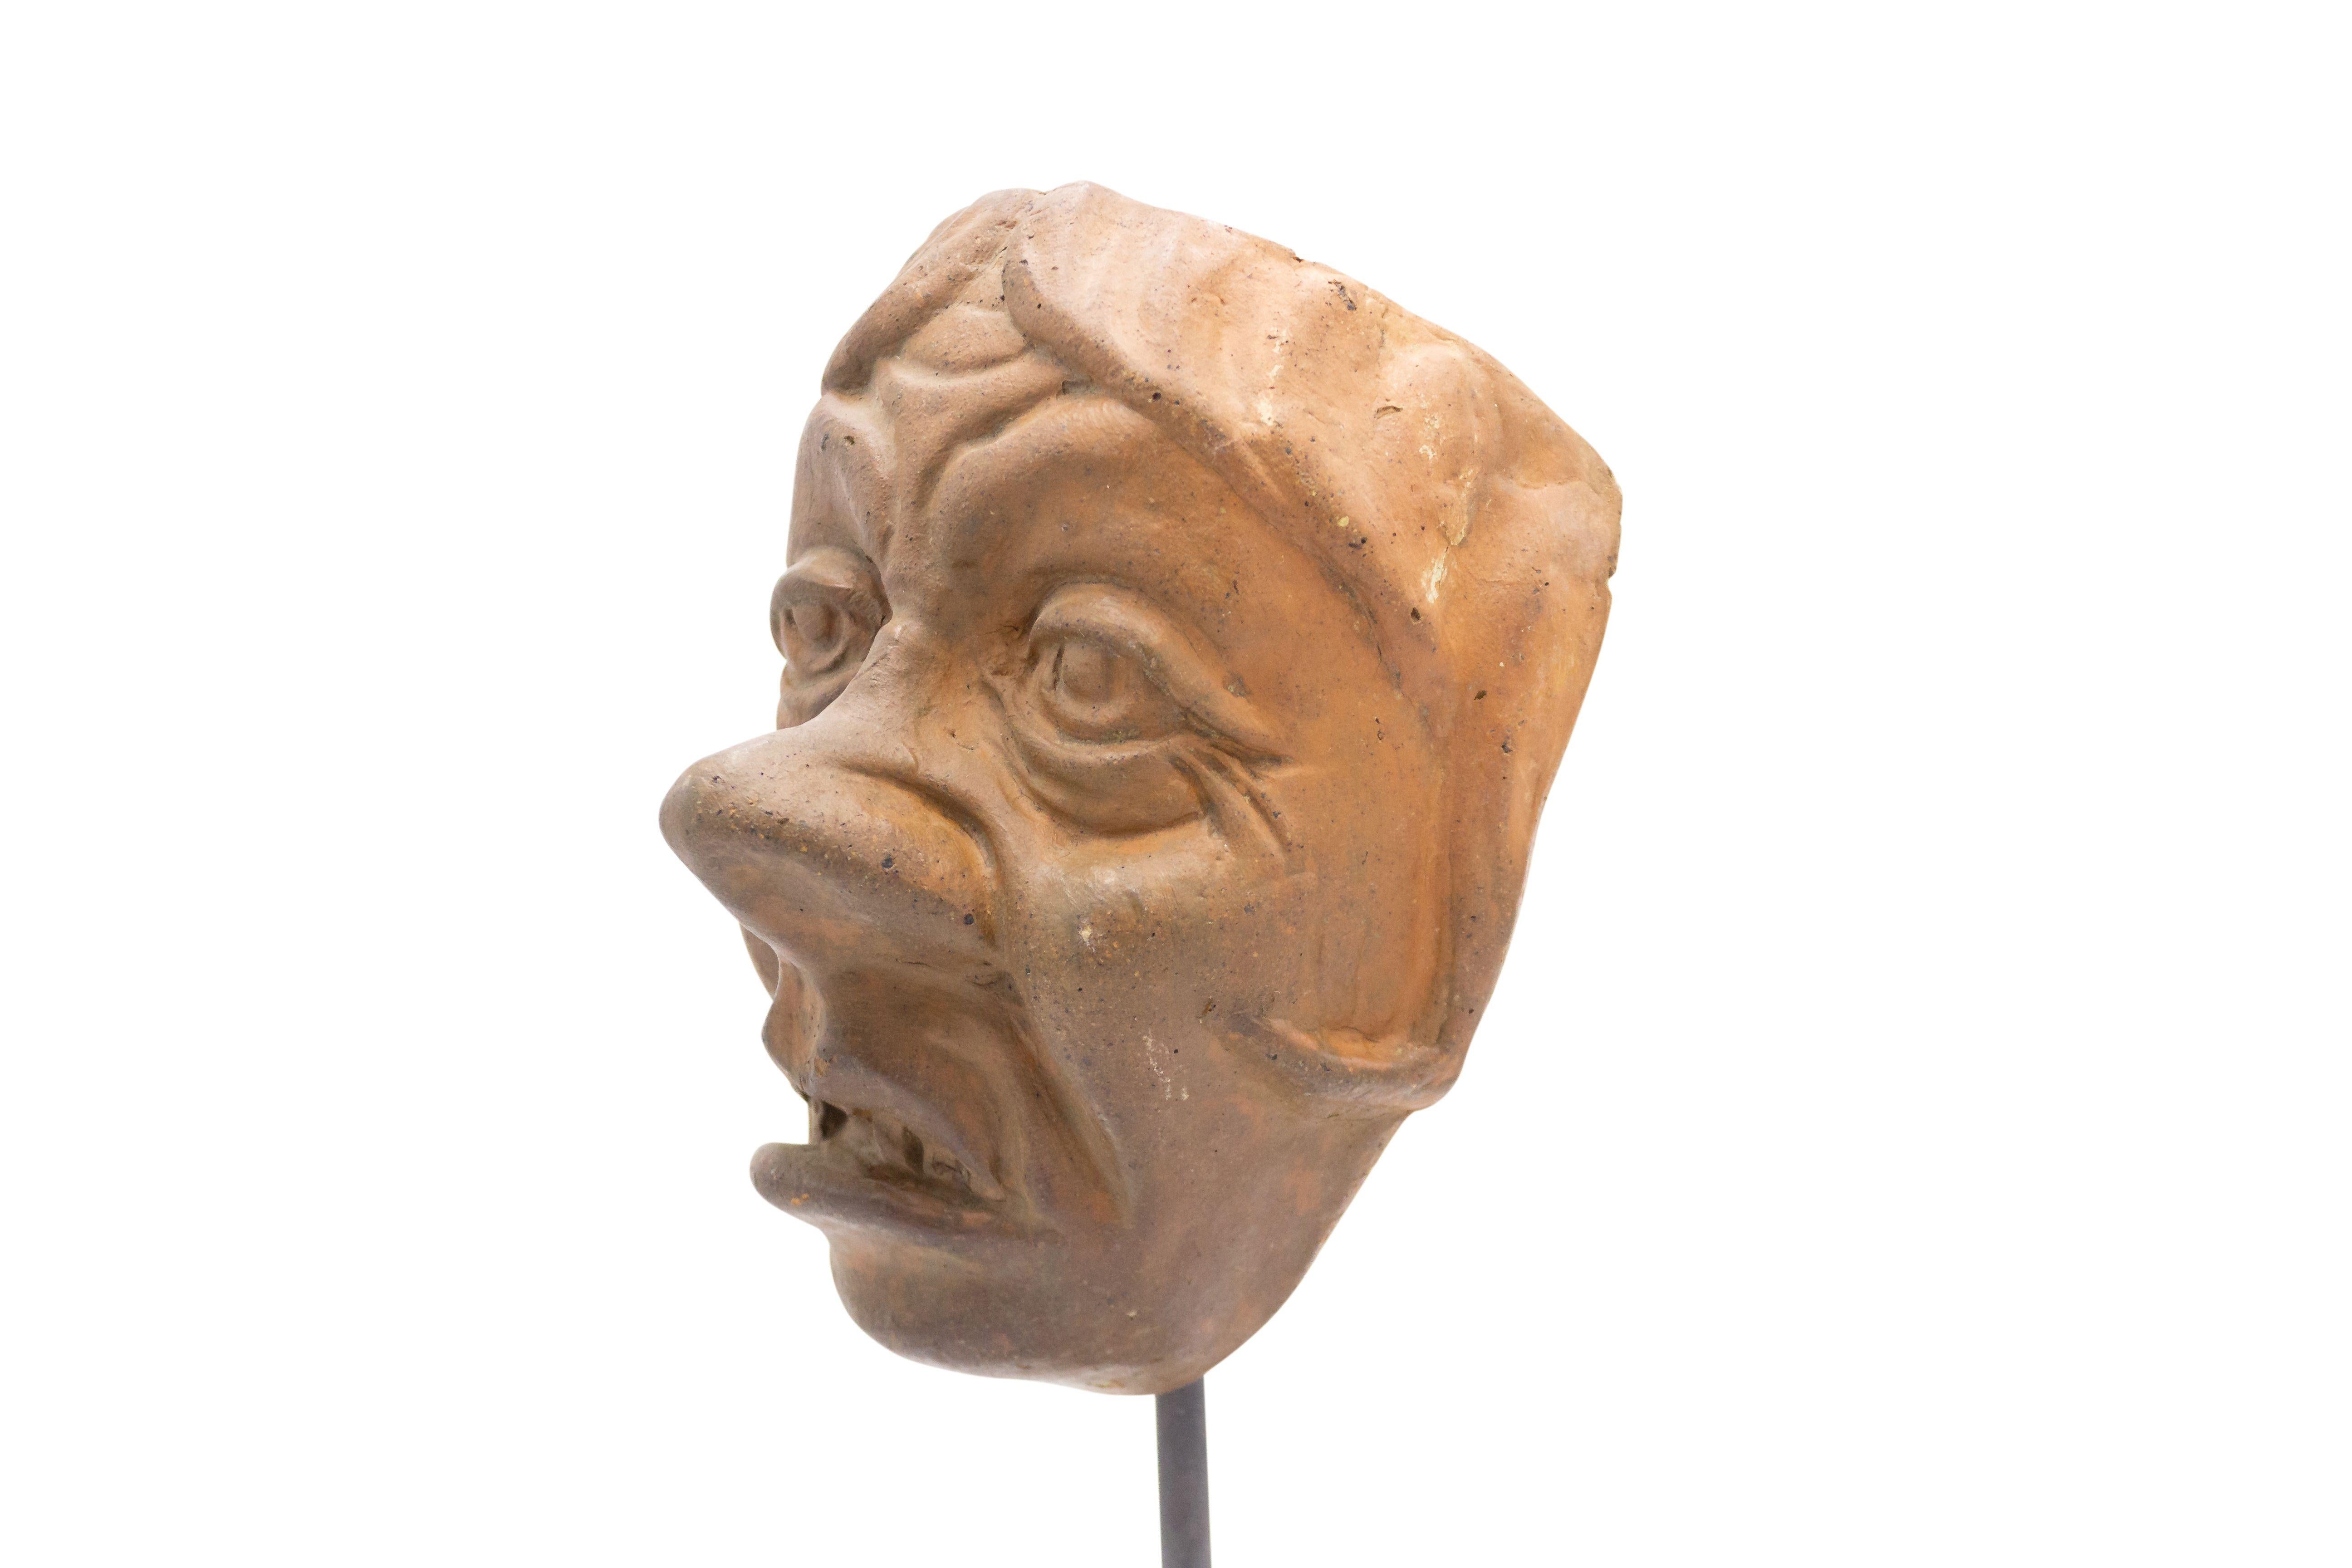 Continental German (late 19th cent) sculpted terra-cotta master mask mold of a sneering wrinkled face displayed on a square black marble base stand (part of a collection).
     